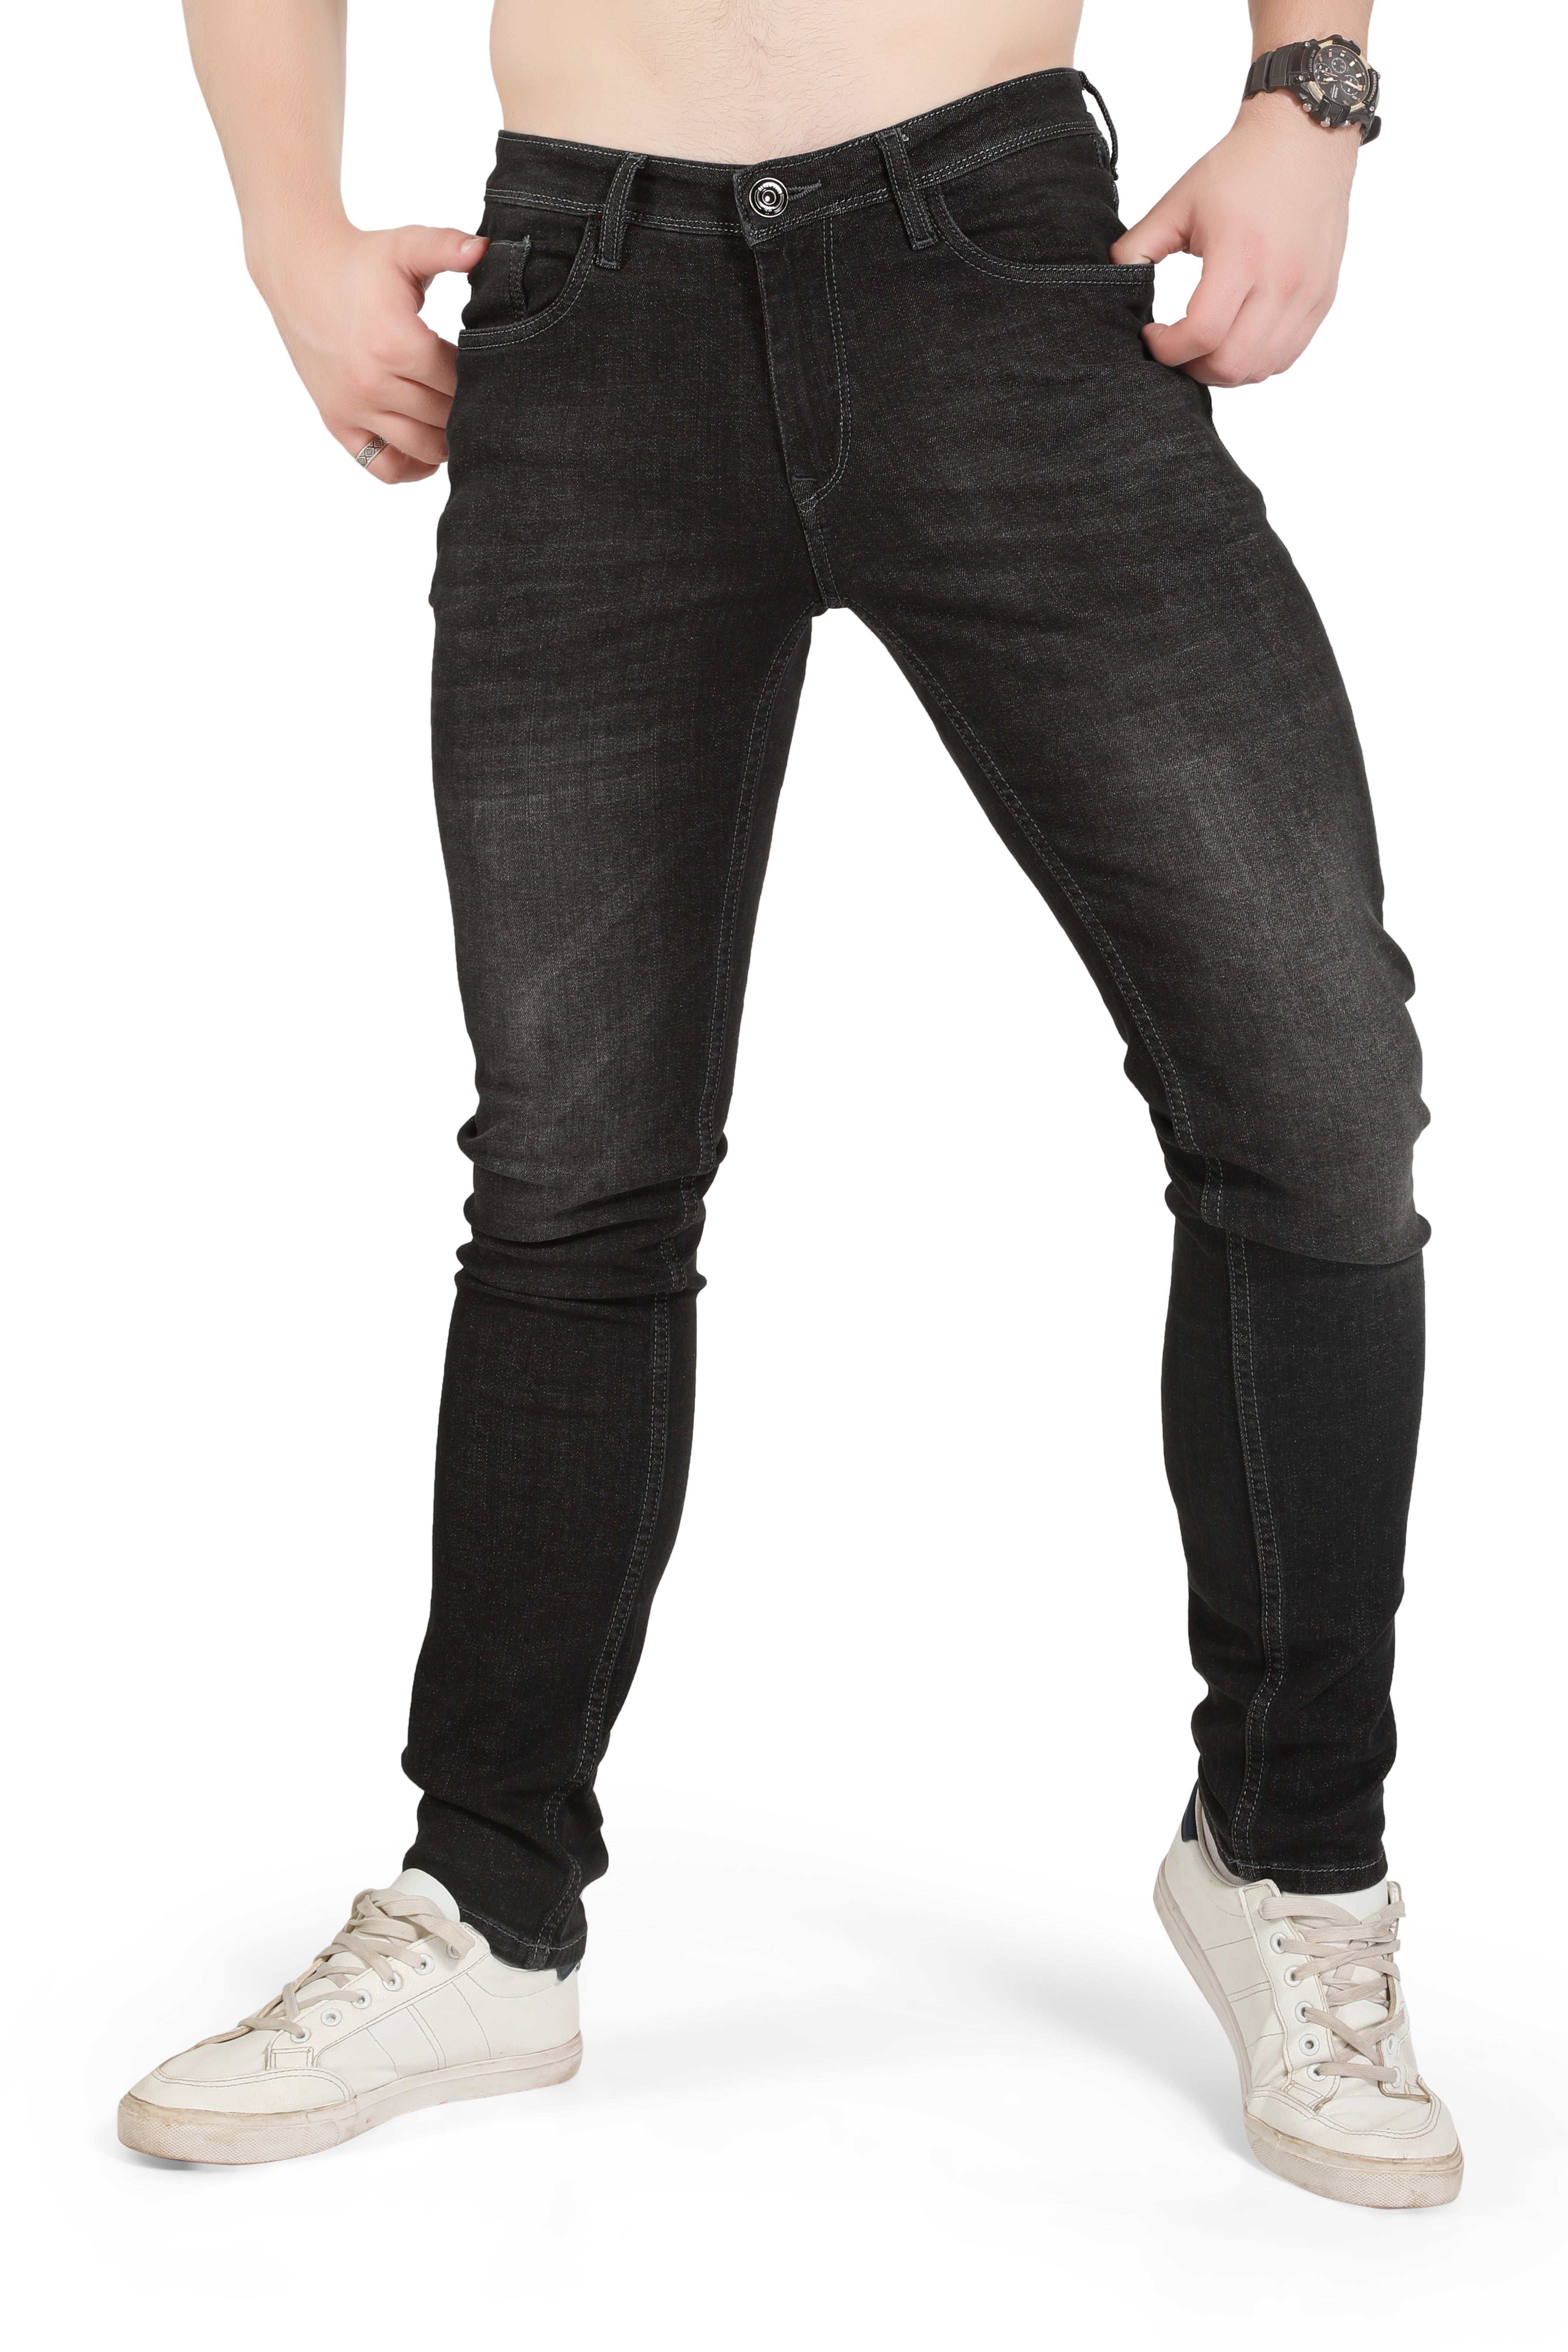 Buy 29 Inch Leg Jeans for Men | Fast UK Delivery - Global Attire